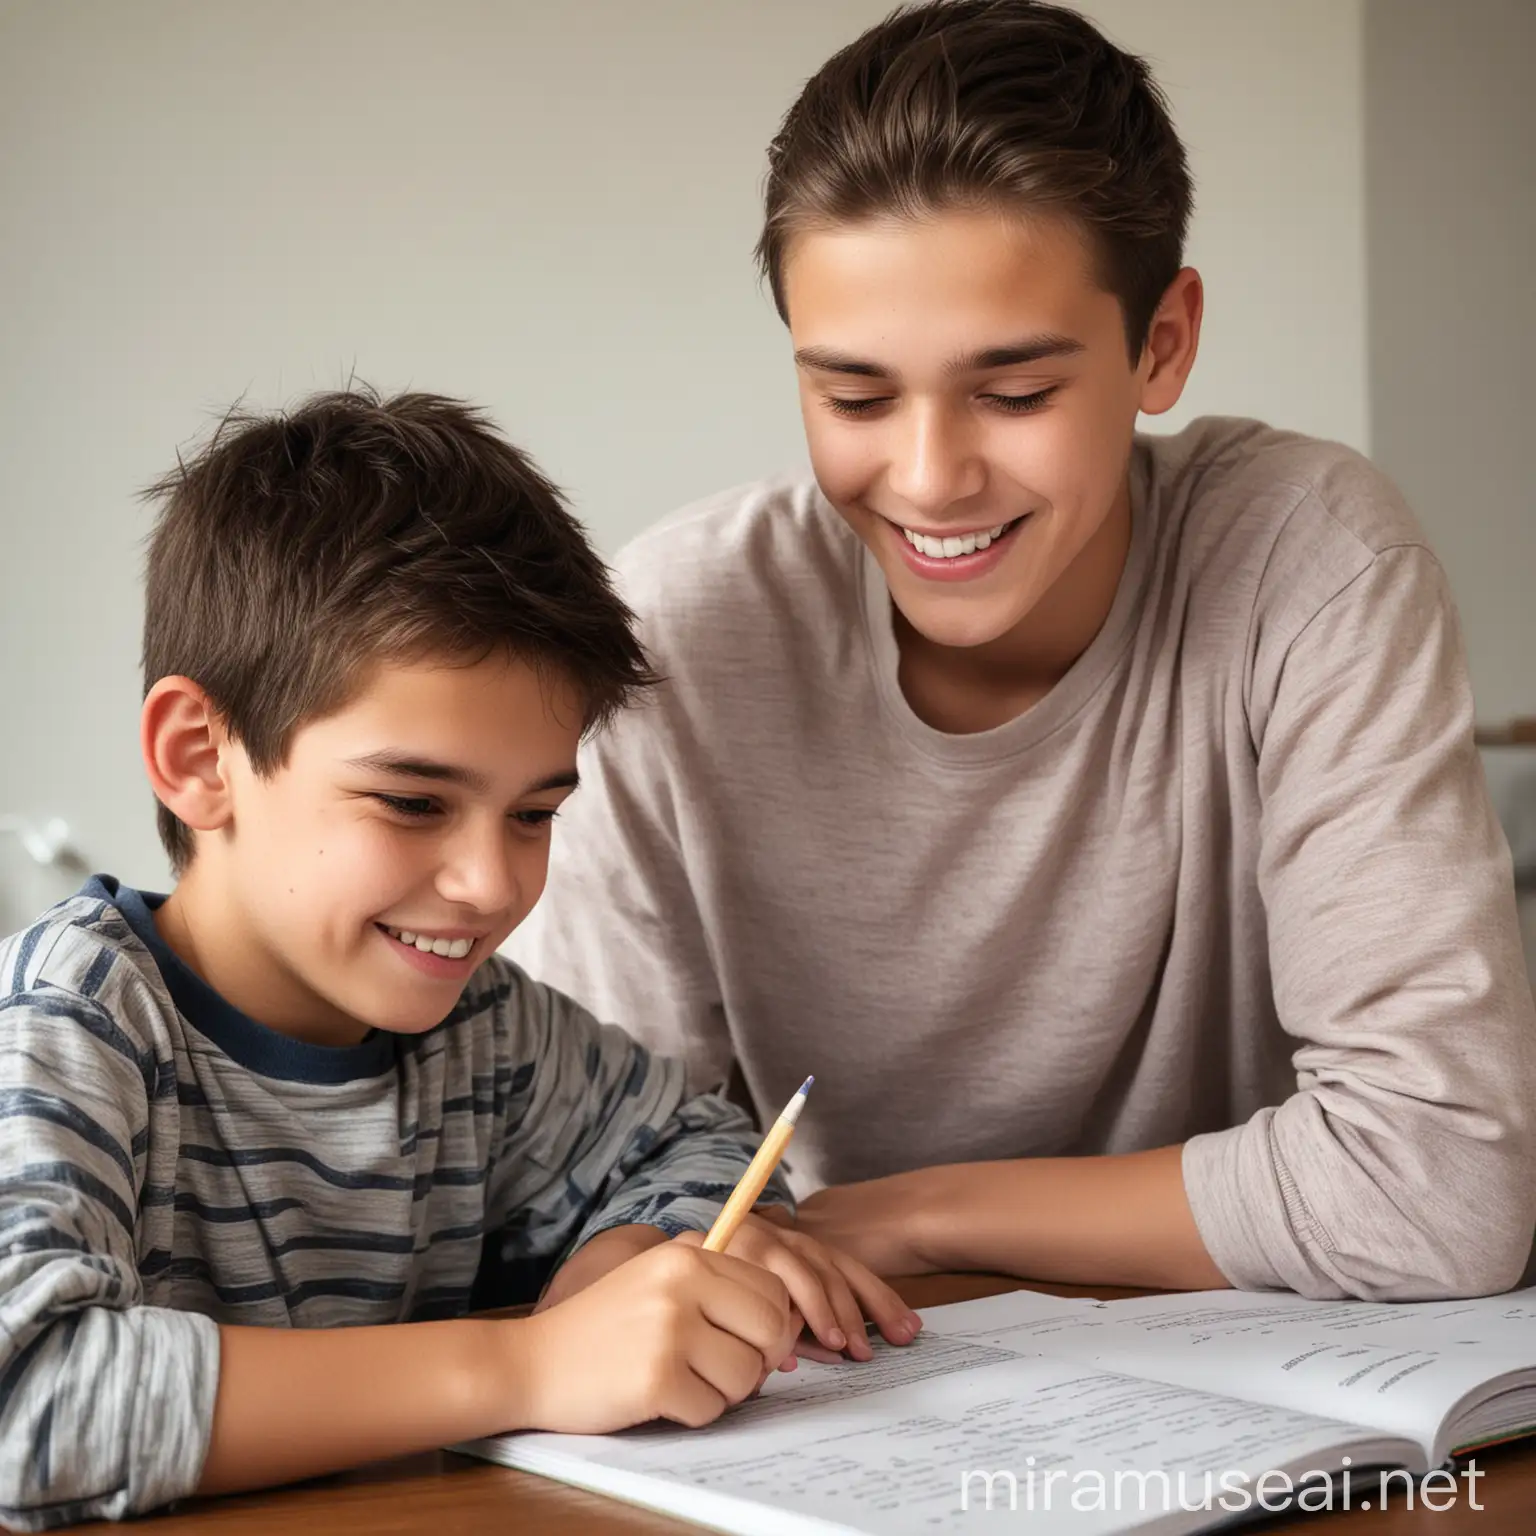 Teenager Receives Homework Assistance from Smiling Child